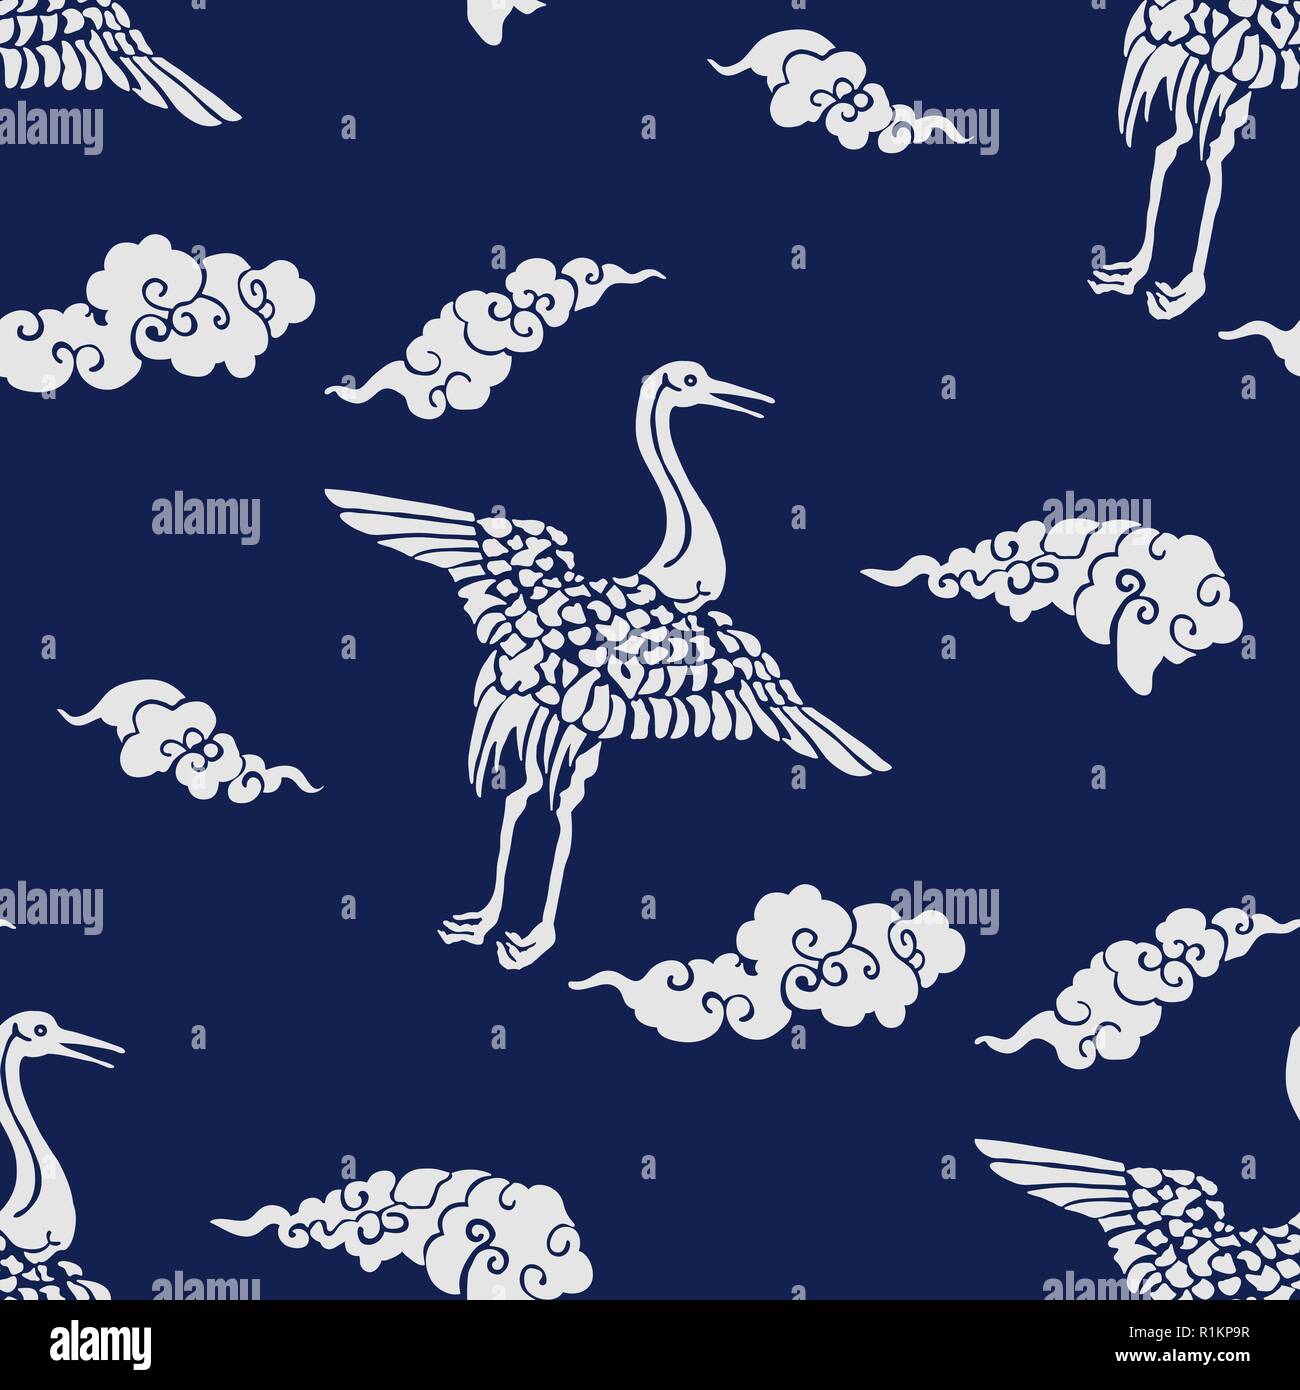 Indigo dye seamless  stencil pattern, Japanese traditional motif with cranes and clouds. Ecru on navy blue background. Stock Vector